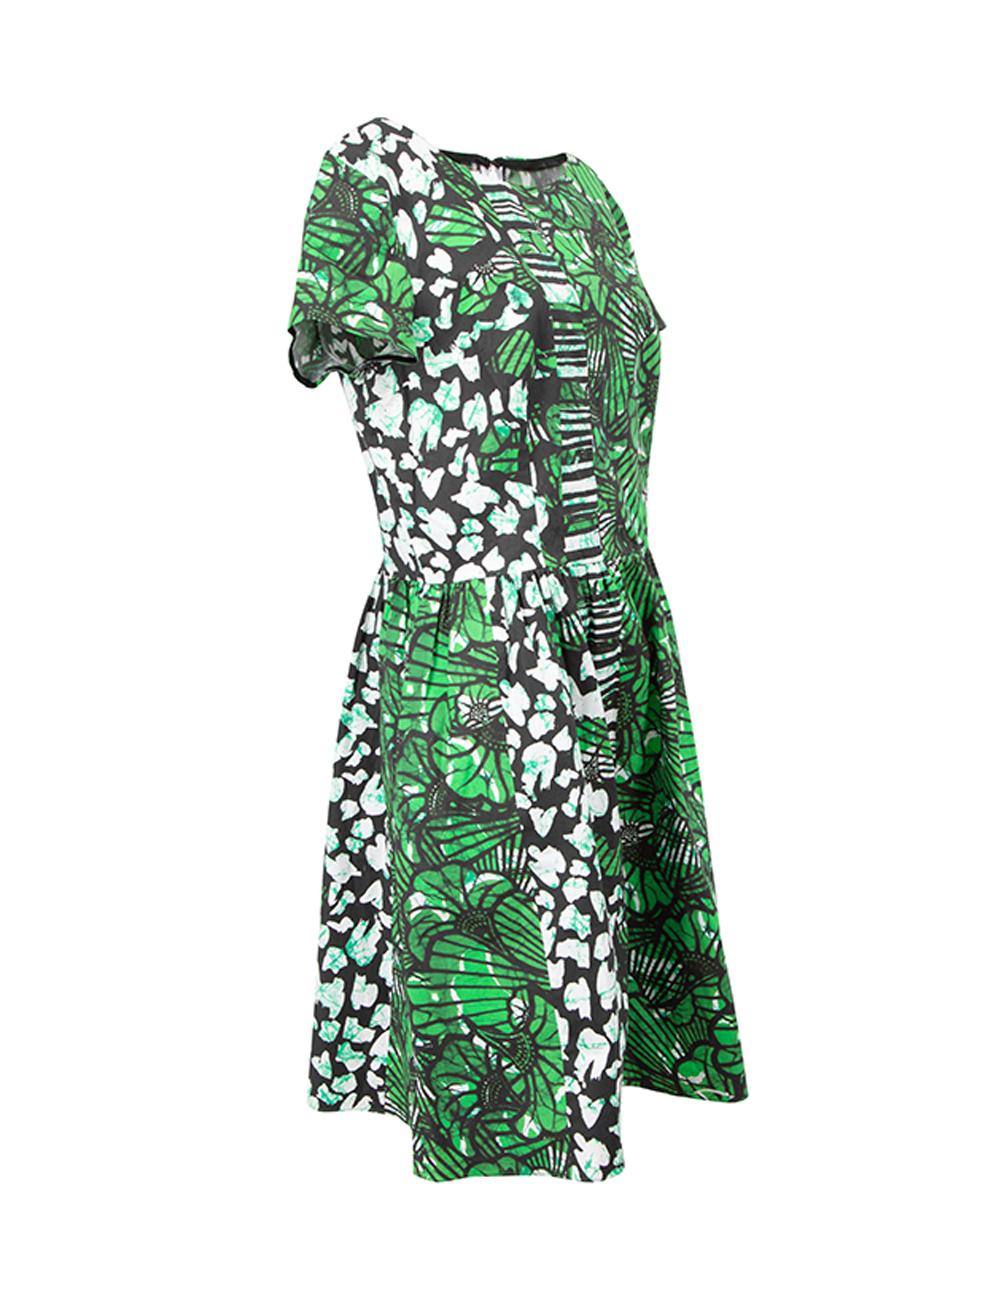 CONDITION is Very good. Hardly any visible wear to dress is evident on this used Oscar de la Renta designer resale item.



Details


Green

Cotton

Mini dress

Abstract print pattern

Round neckline

Short cap sleeves

Back zip closure with hook